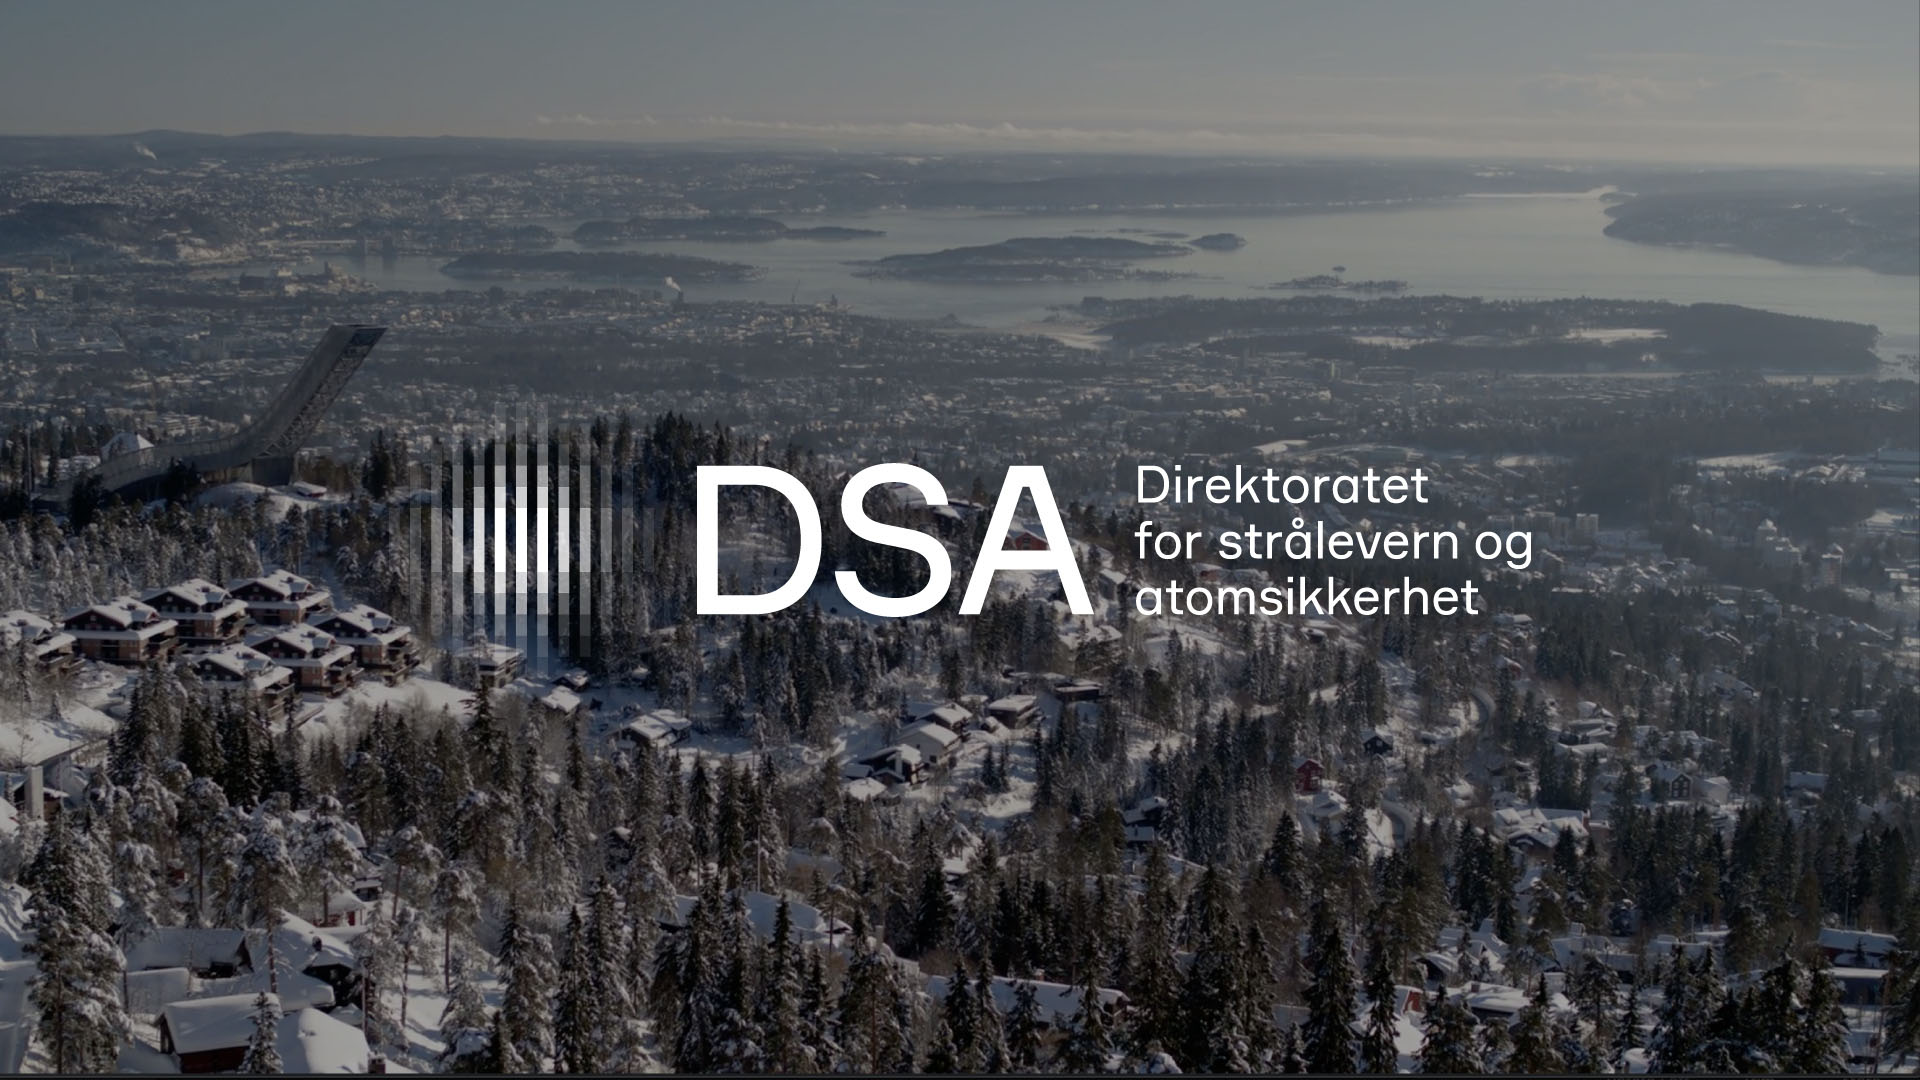 New Logo and Identity for Norwegian Radiation and Nuclear Safety Authority by Bielke&Yang